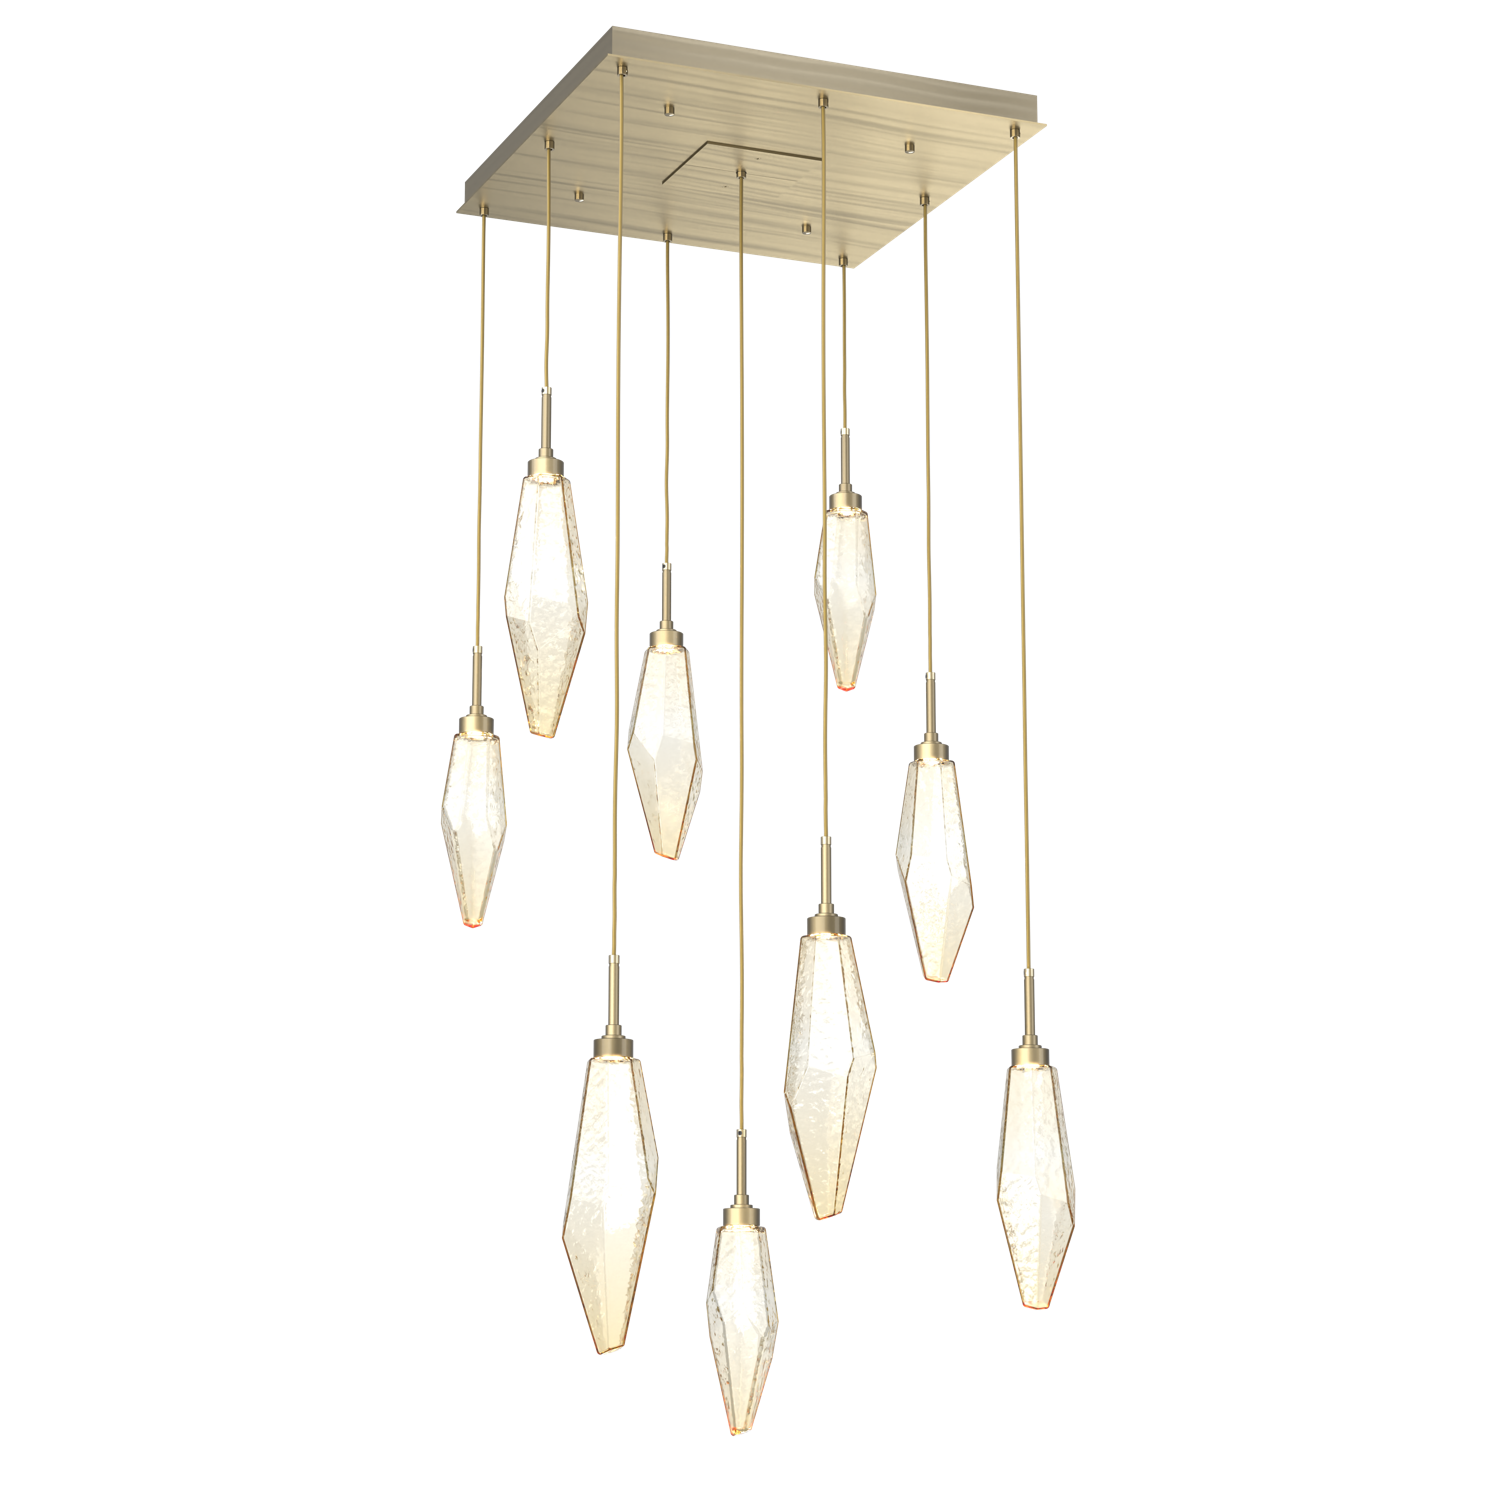 CHB0050-09-HB-CA-Hammerton-Studio-Rock-Crystal-9-light-square-pendant-chandelier-with-heritage-brass-finish-and-chilled-amber-blown-glass-shades-and-LED-lamping